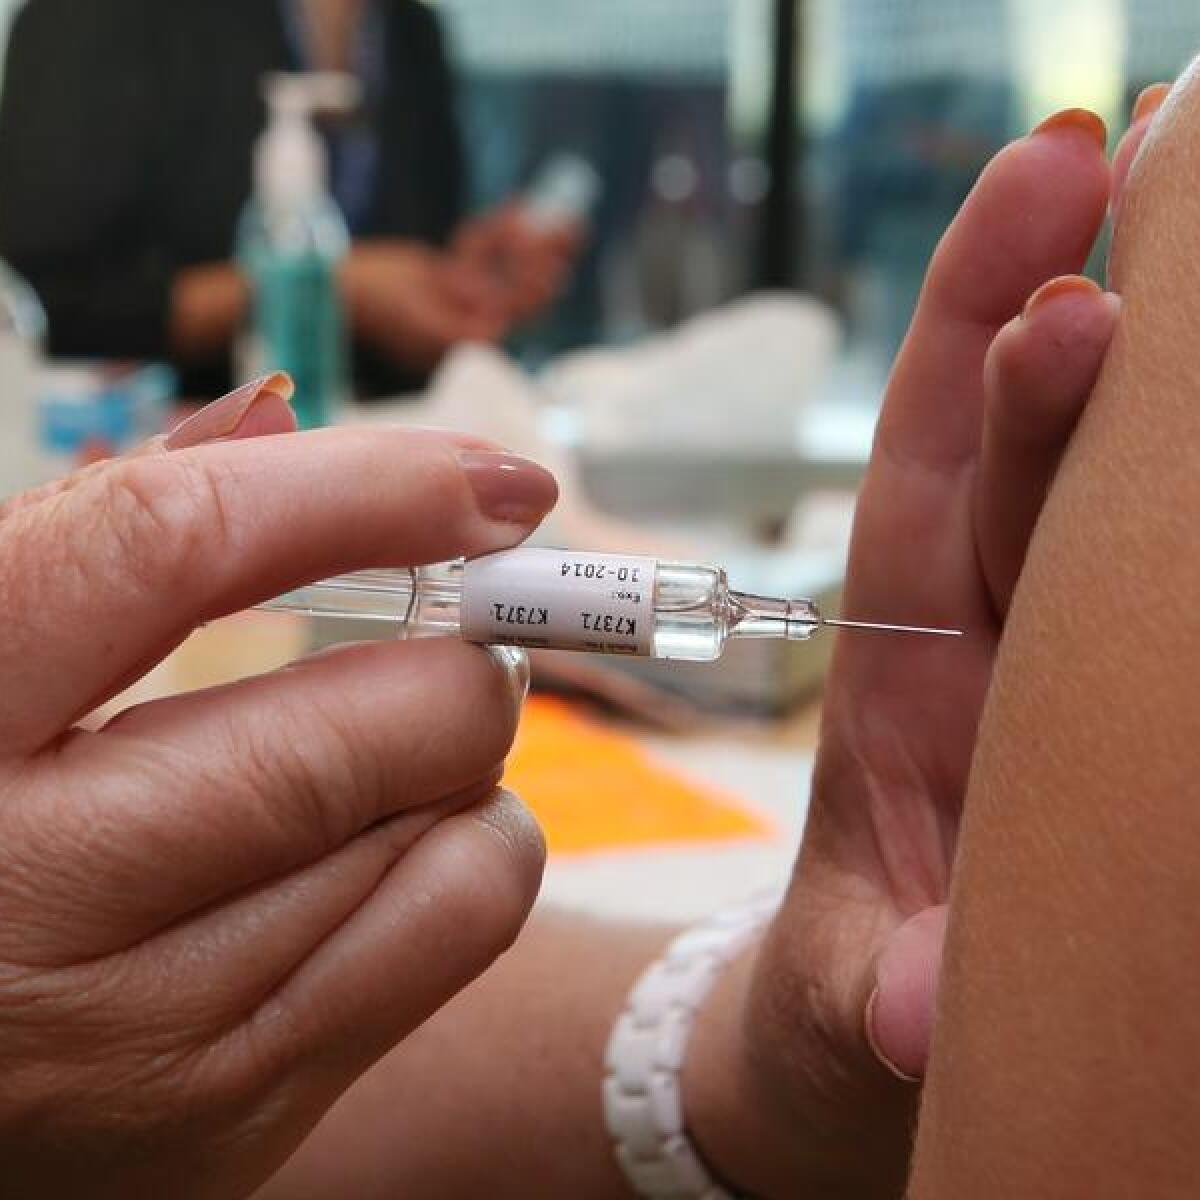 A flu vaccination at the Royal Children's Hospital in Melbourne